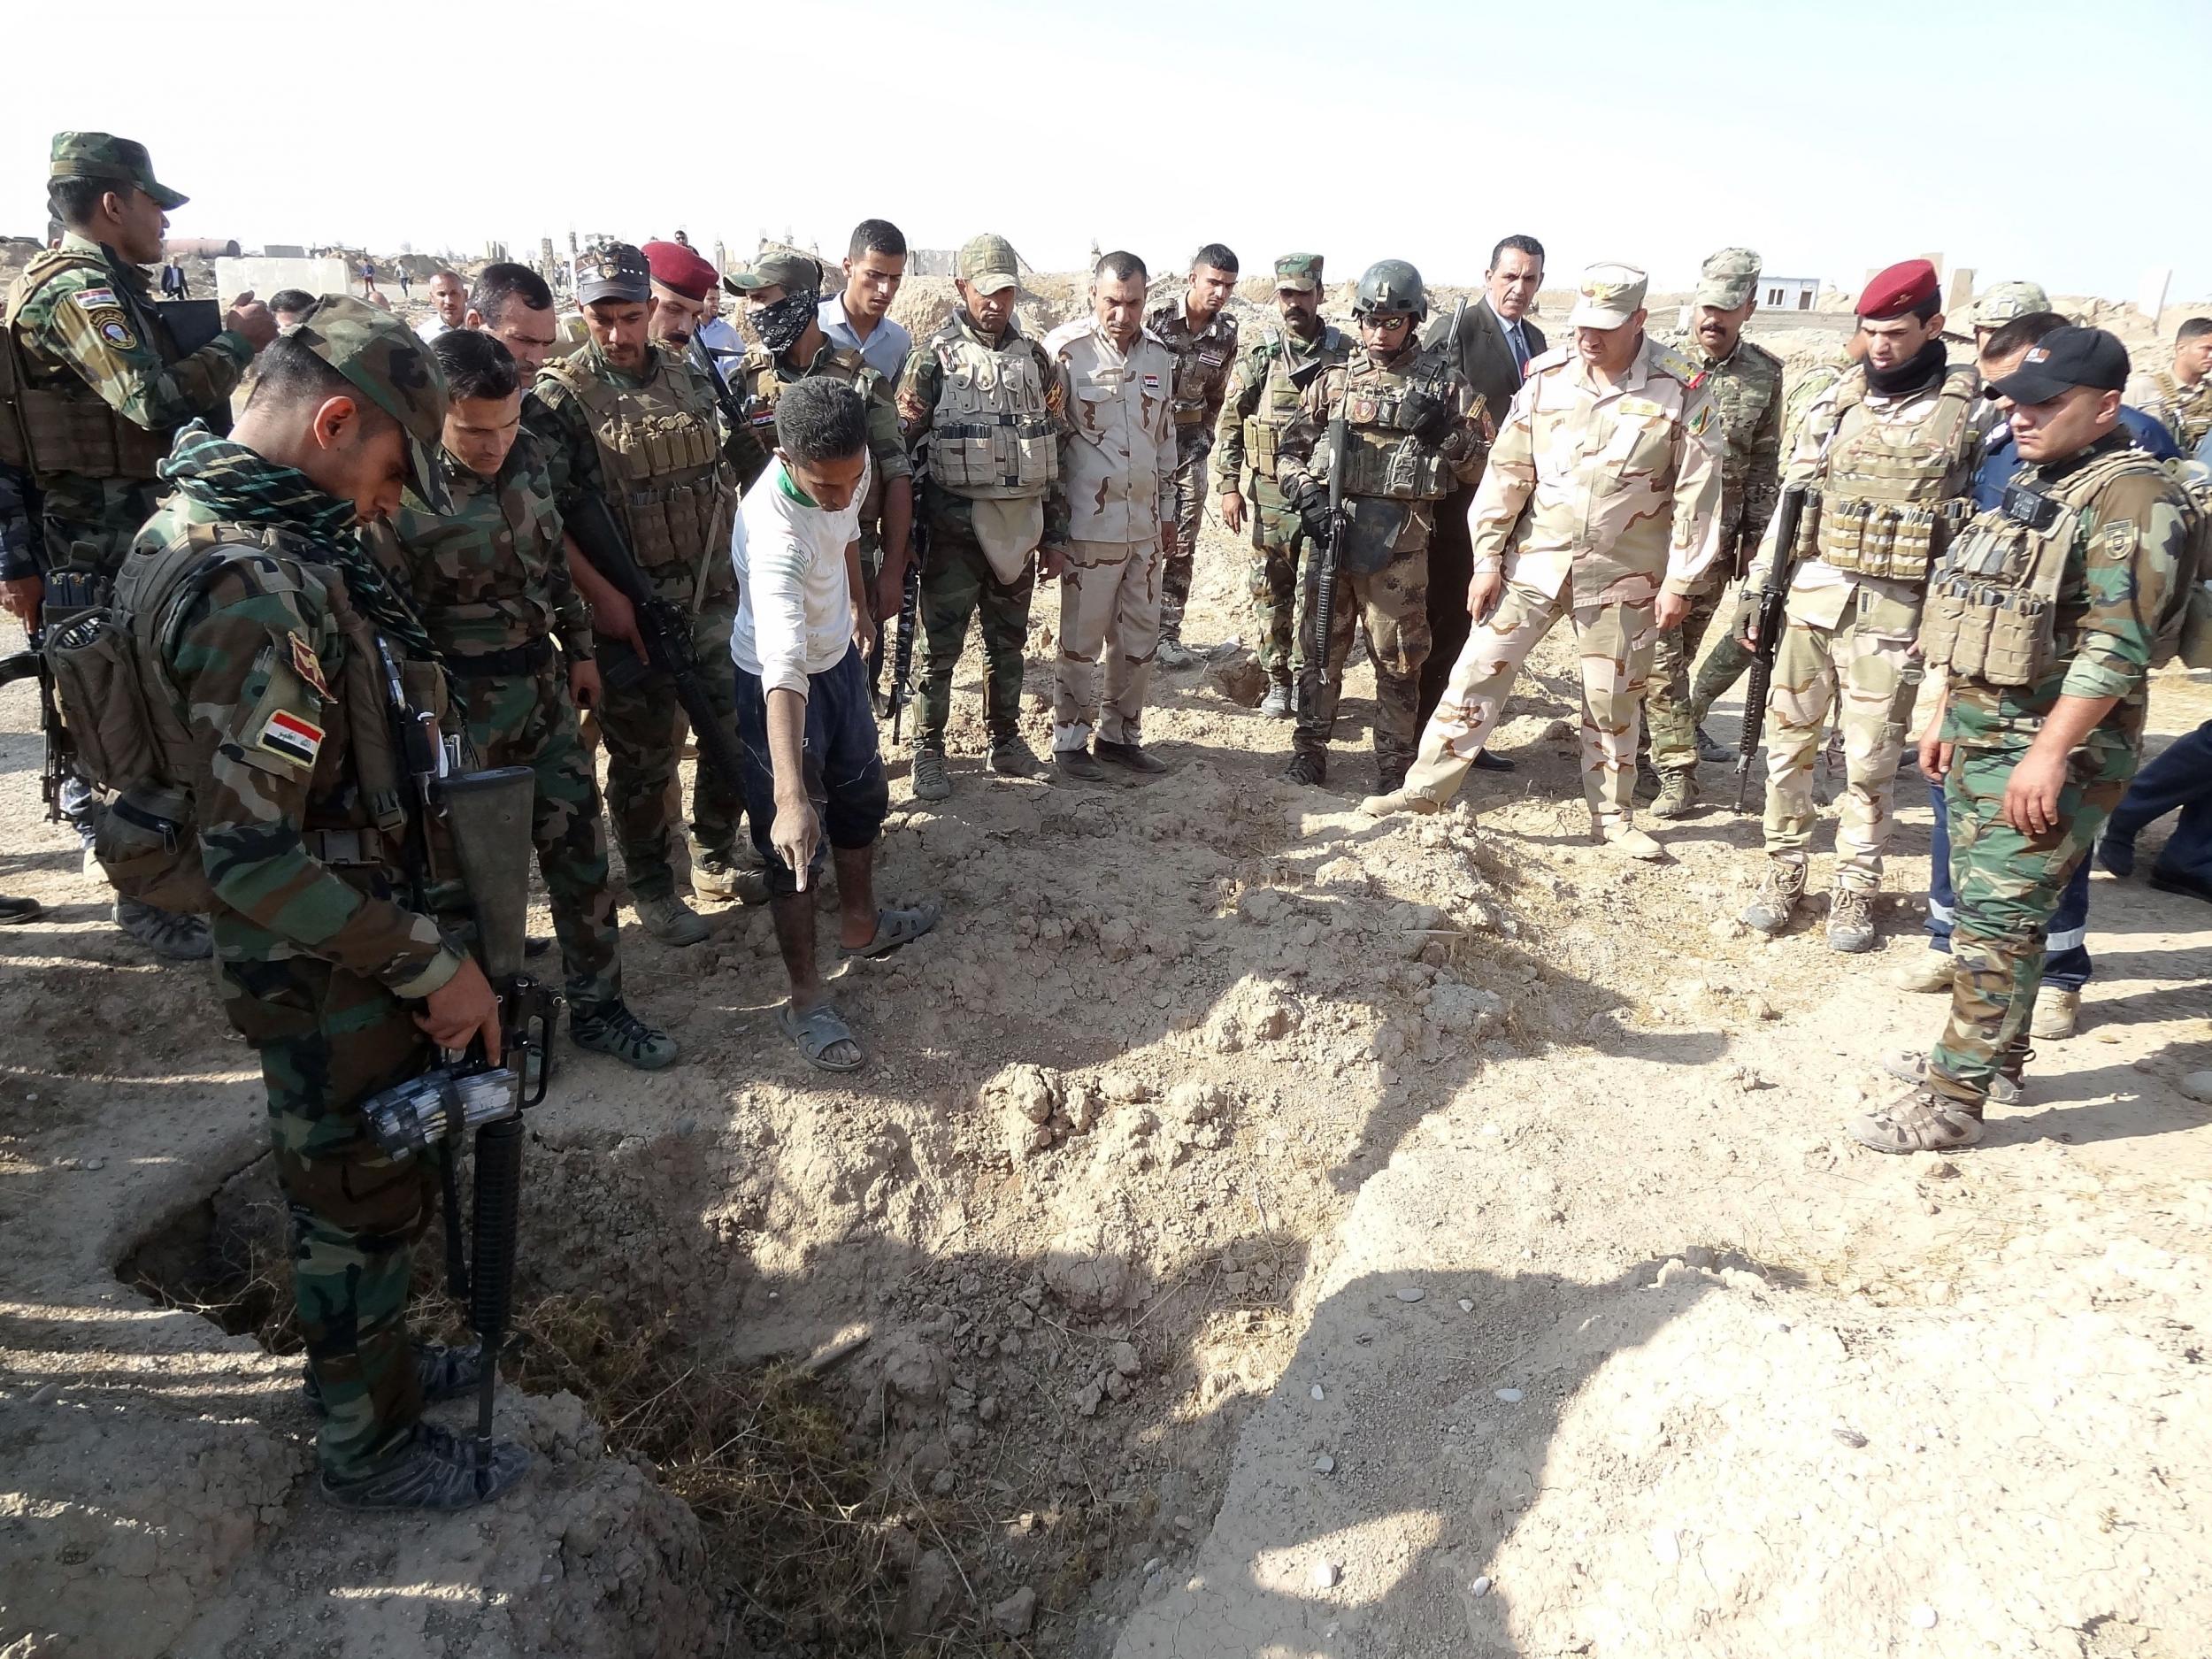 Iraqi forces search the site of a suspected mass grave containing the remains of victims of Isis, near the former al Bakara military base, on 11 November 2017